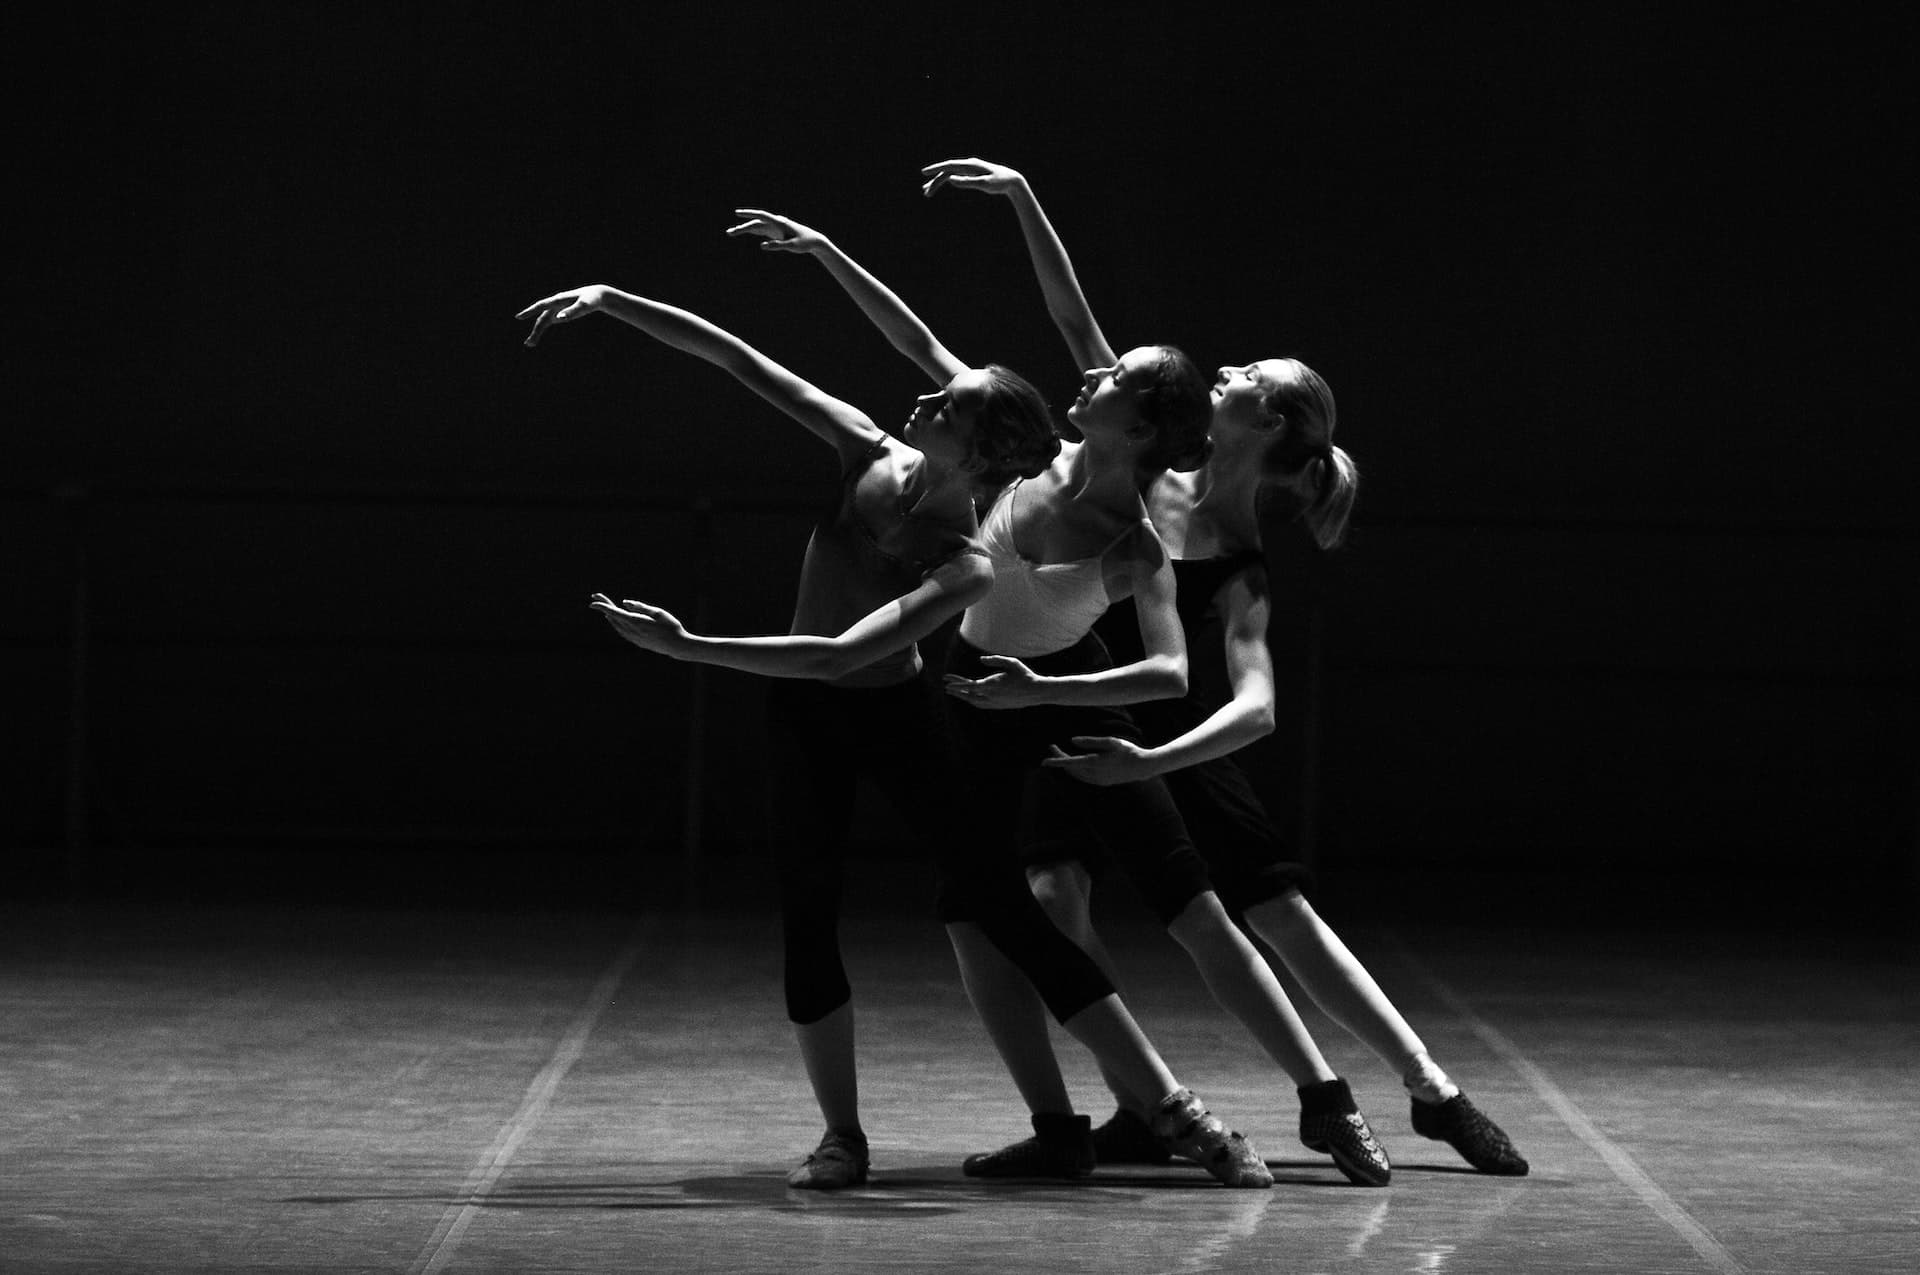 A dramatic black and white photo of three young female ballet dancers performing on stage